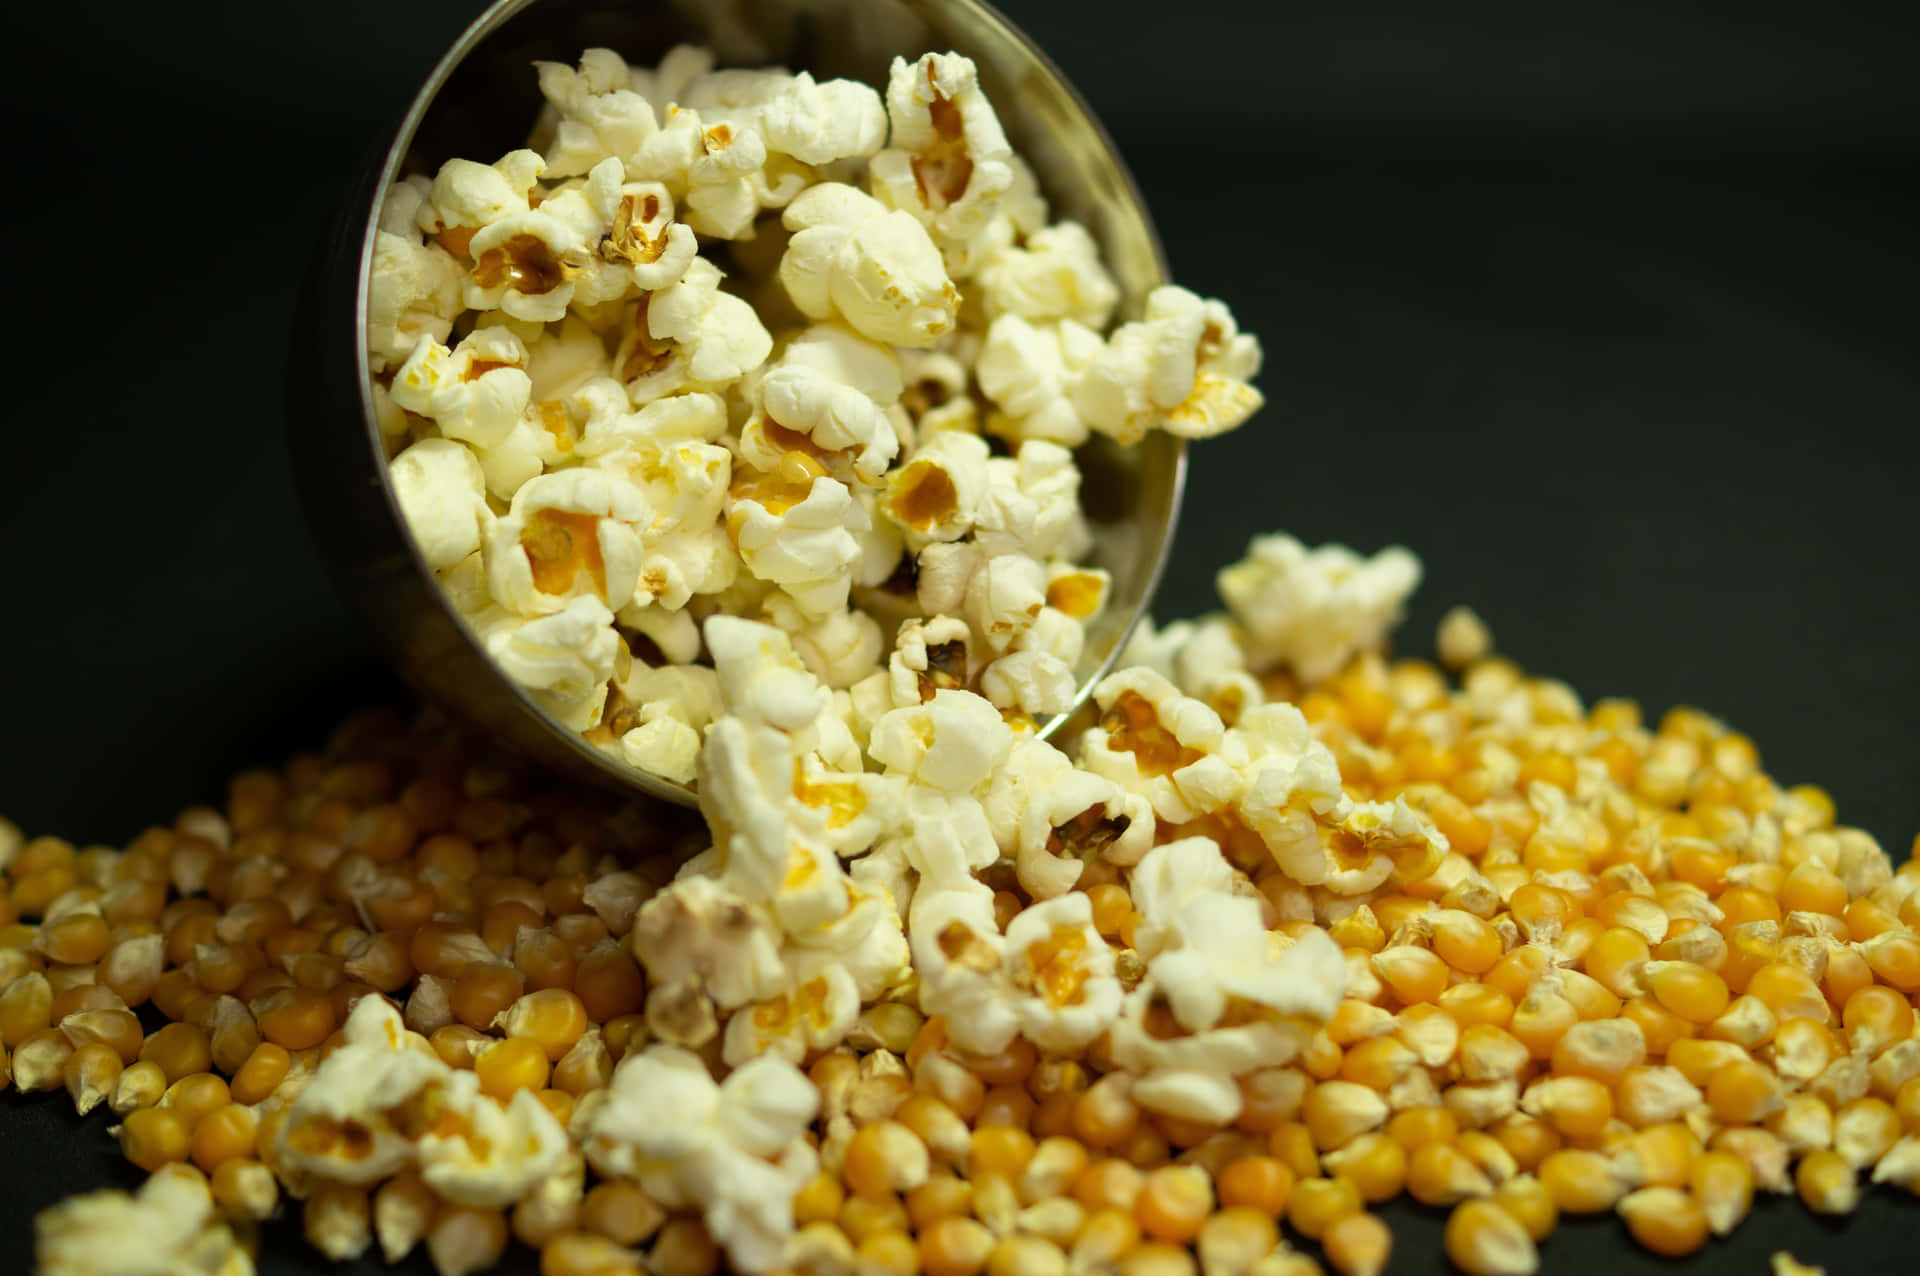 Deliciously salty and buttery popcorn.